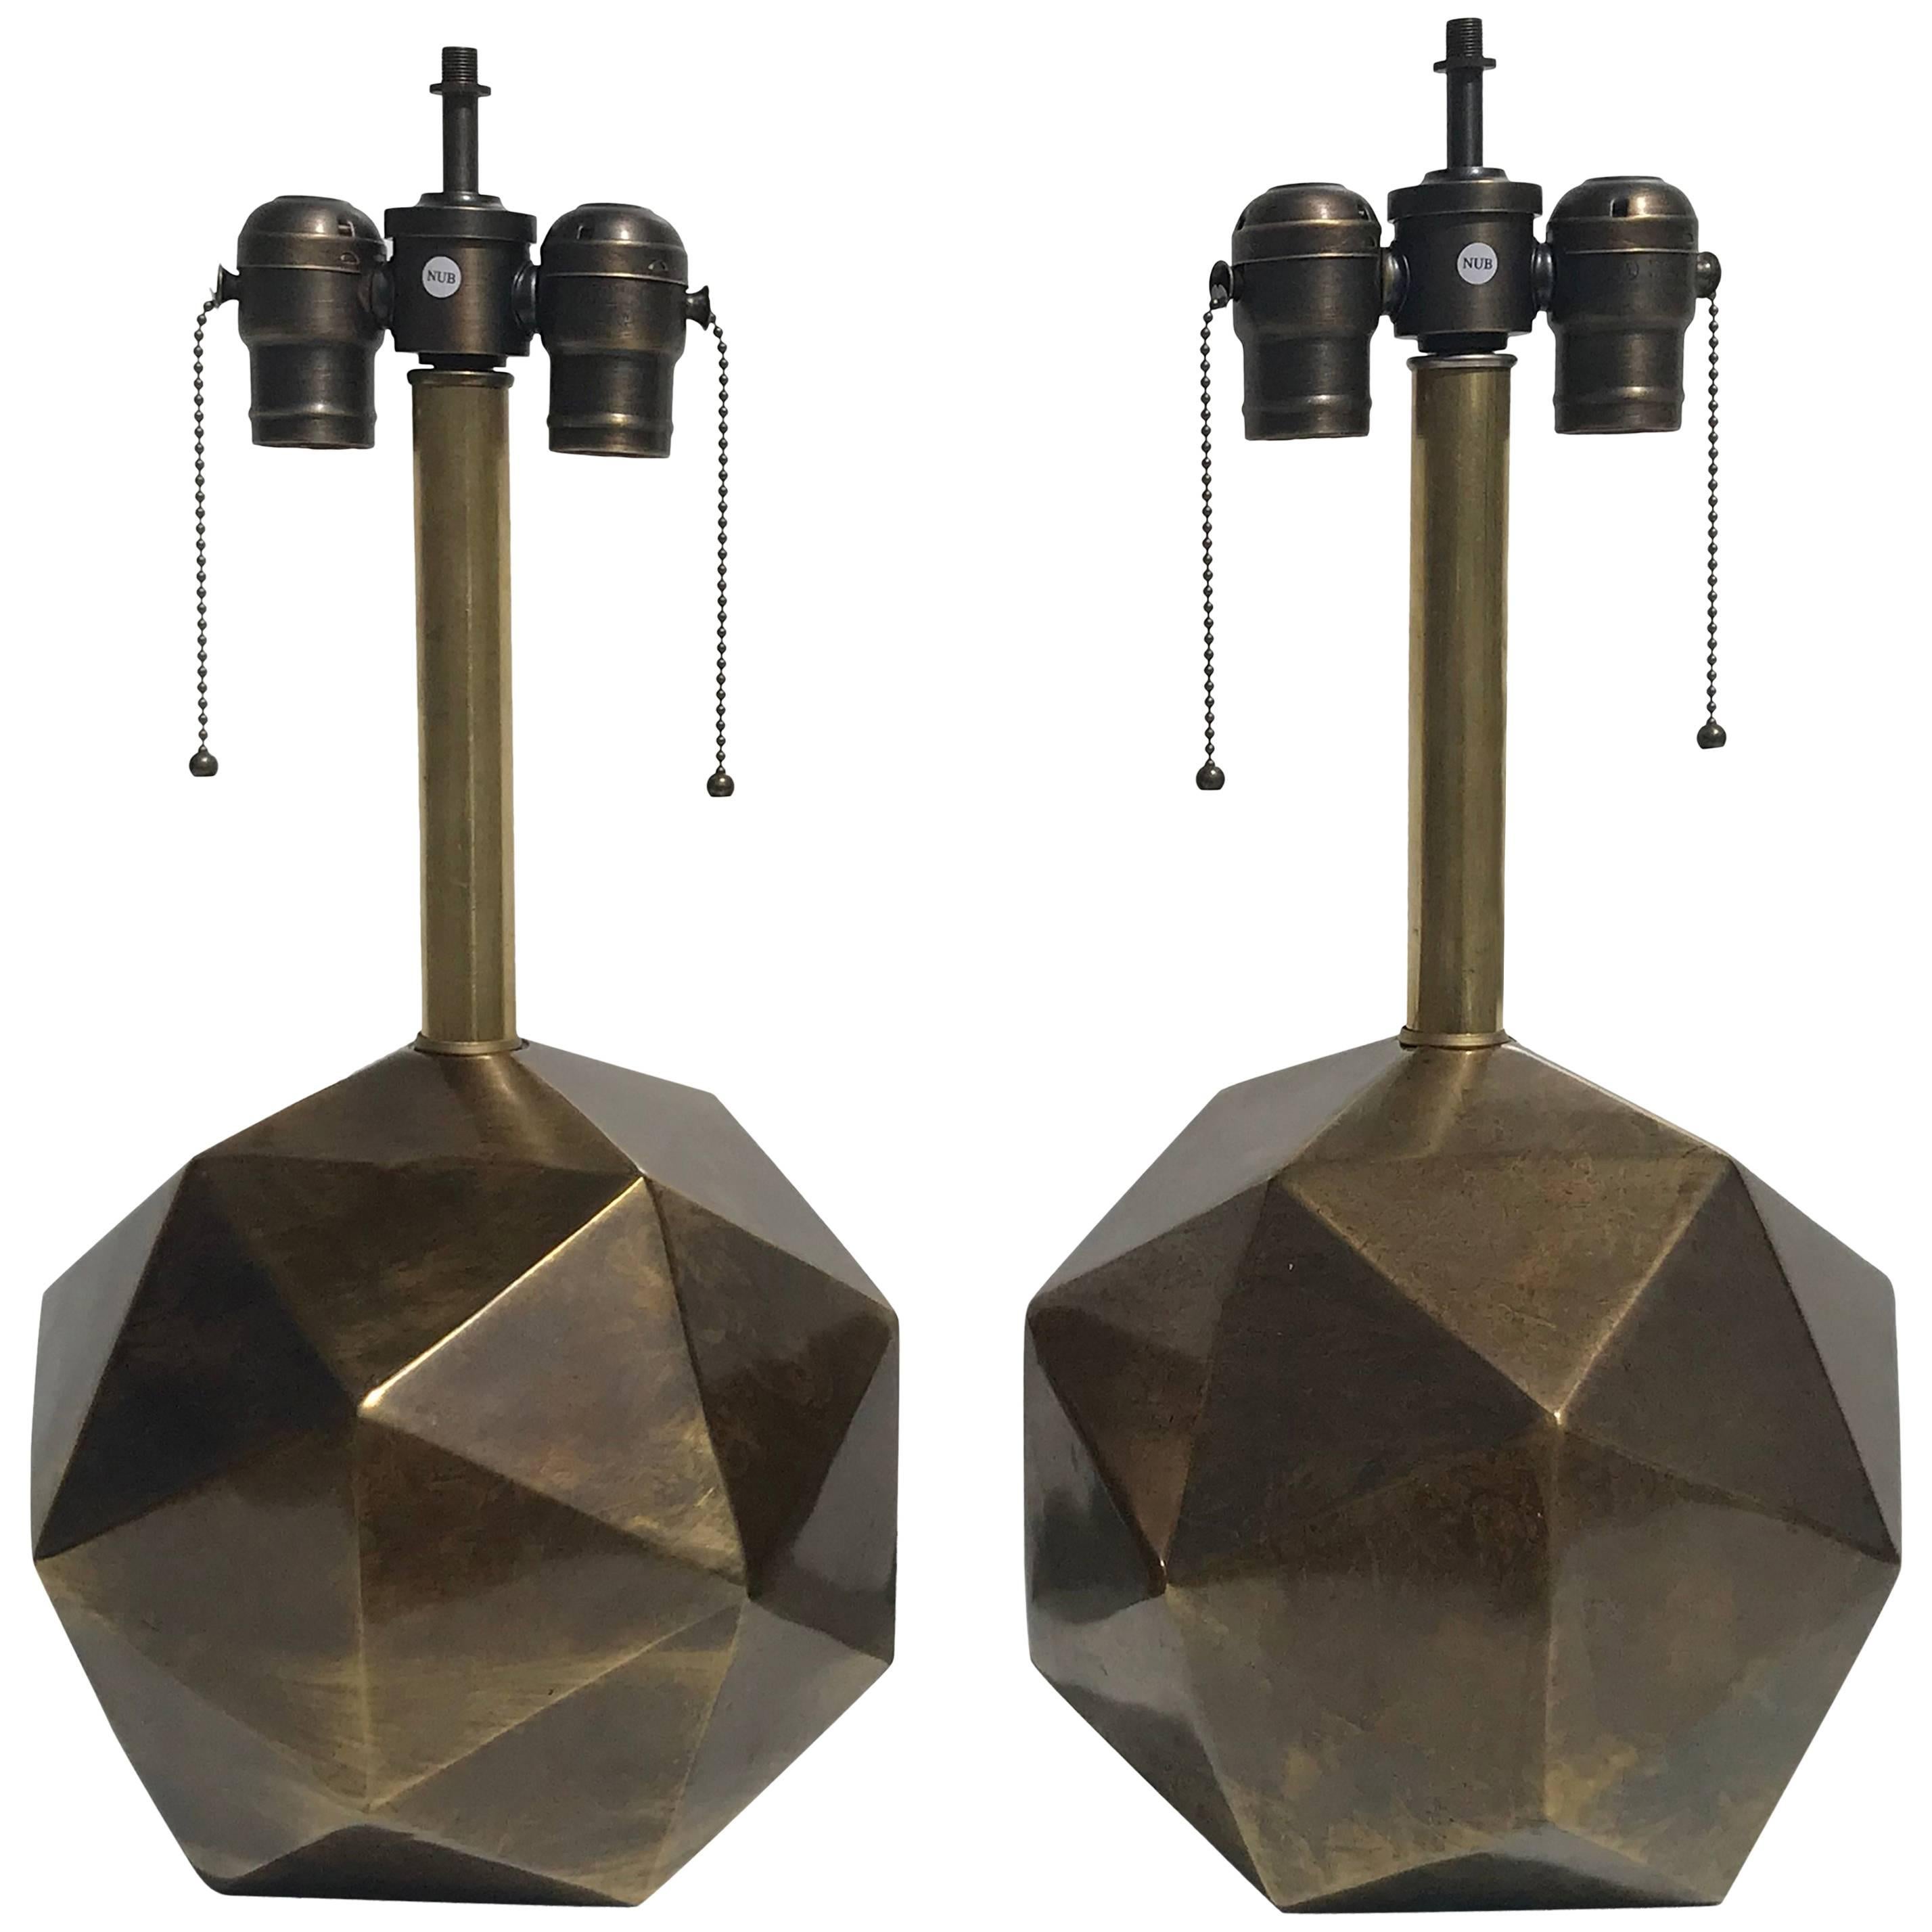 Pair of Westwood Geometric Faceted Lamps